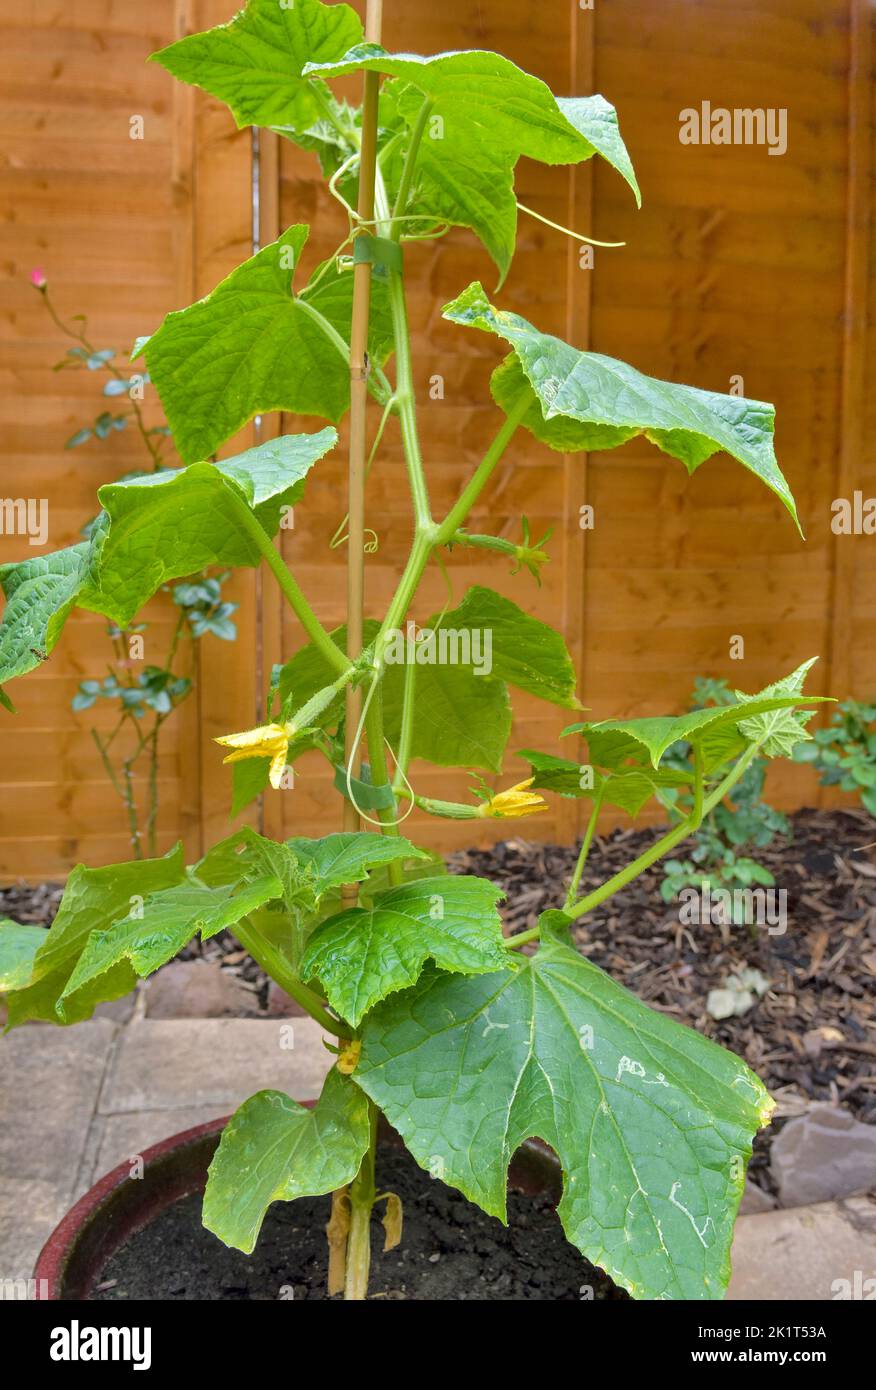 Organic Cucumber plant growing in pot in garden. Cucumber variety Delistar F1 Stock Photo